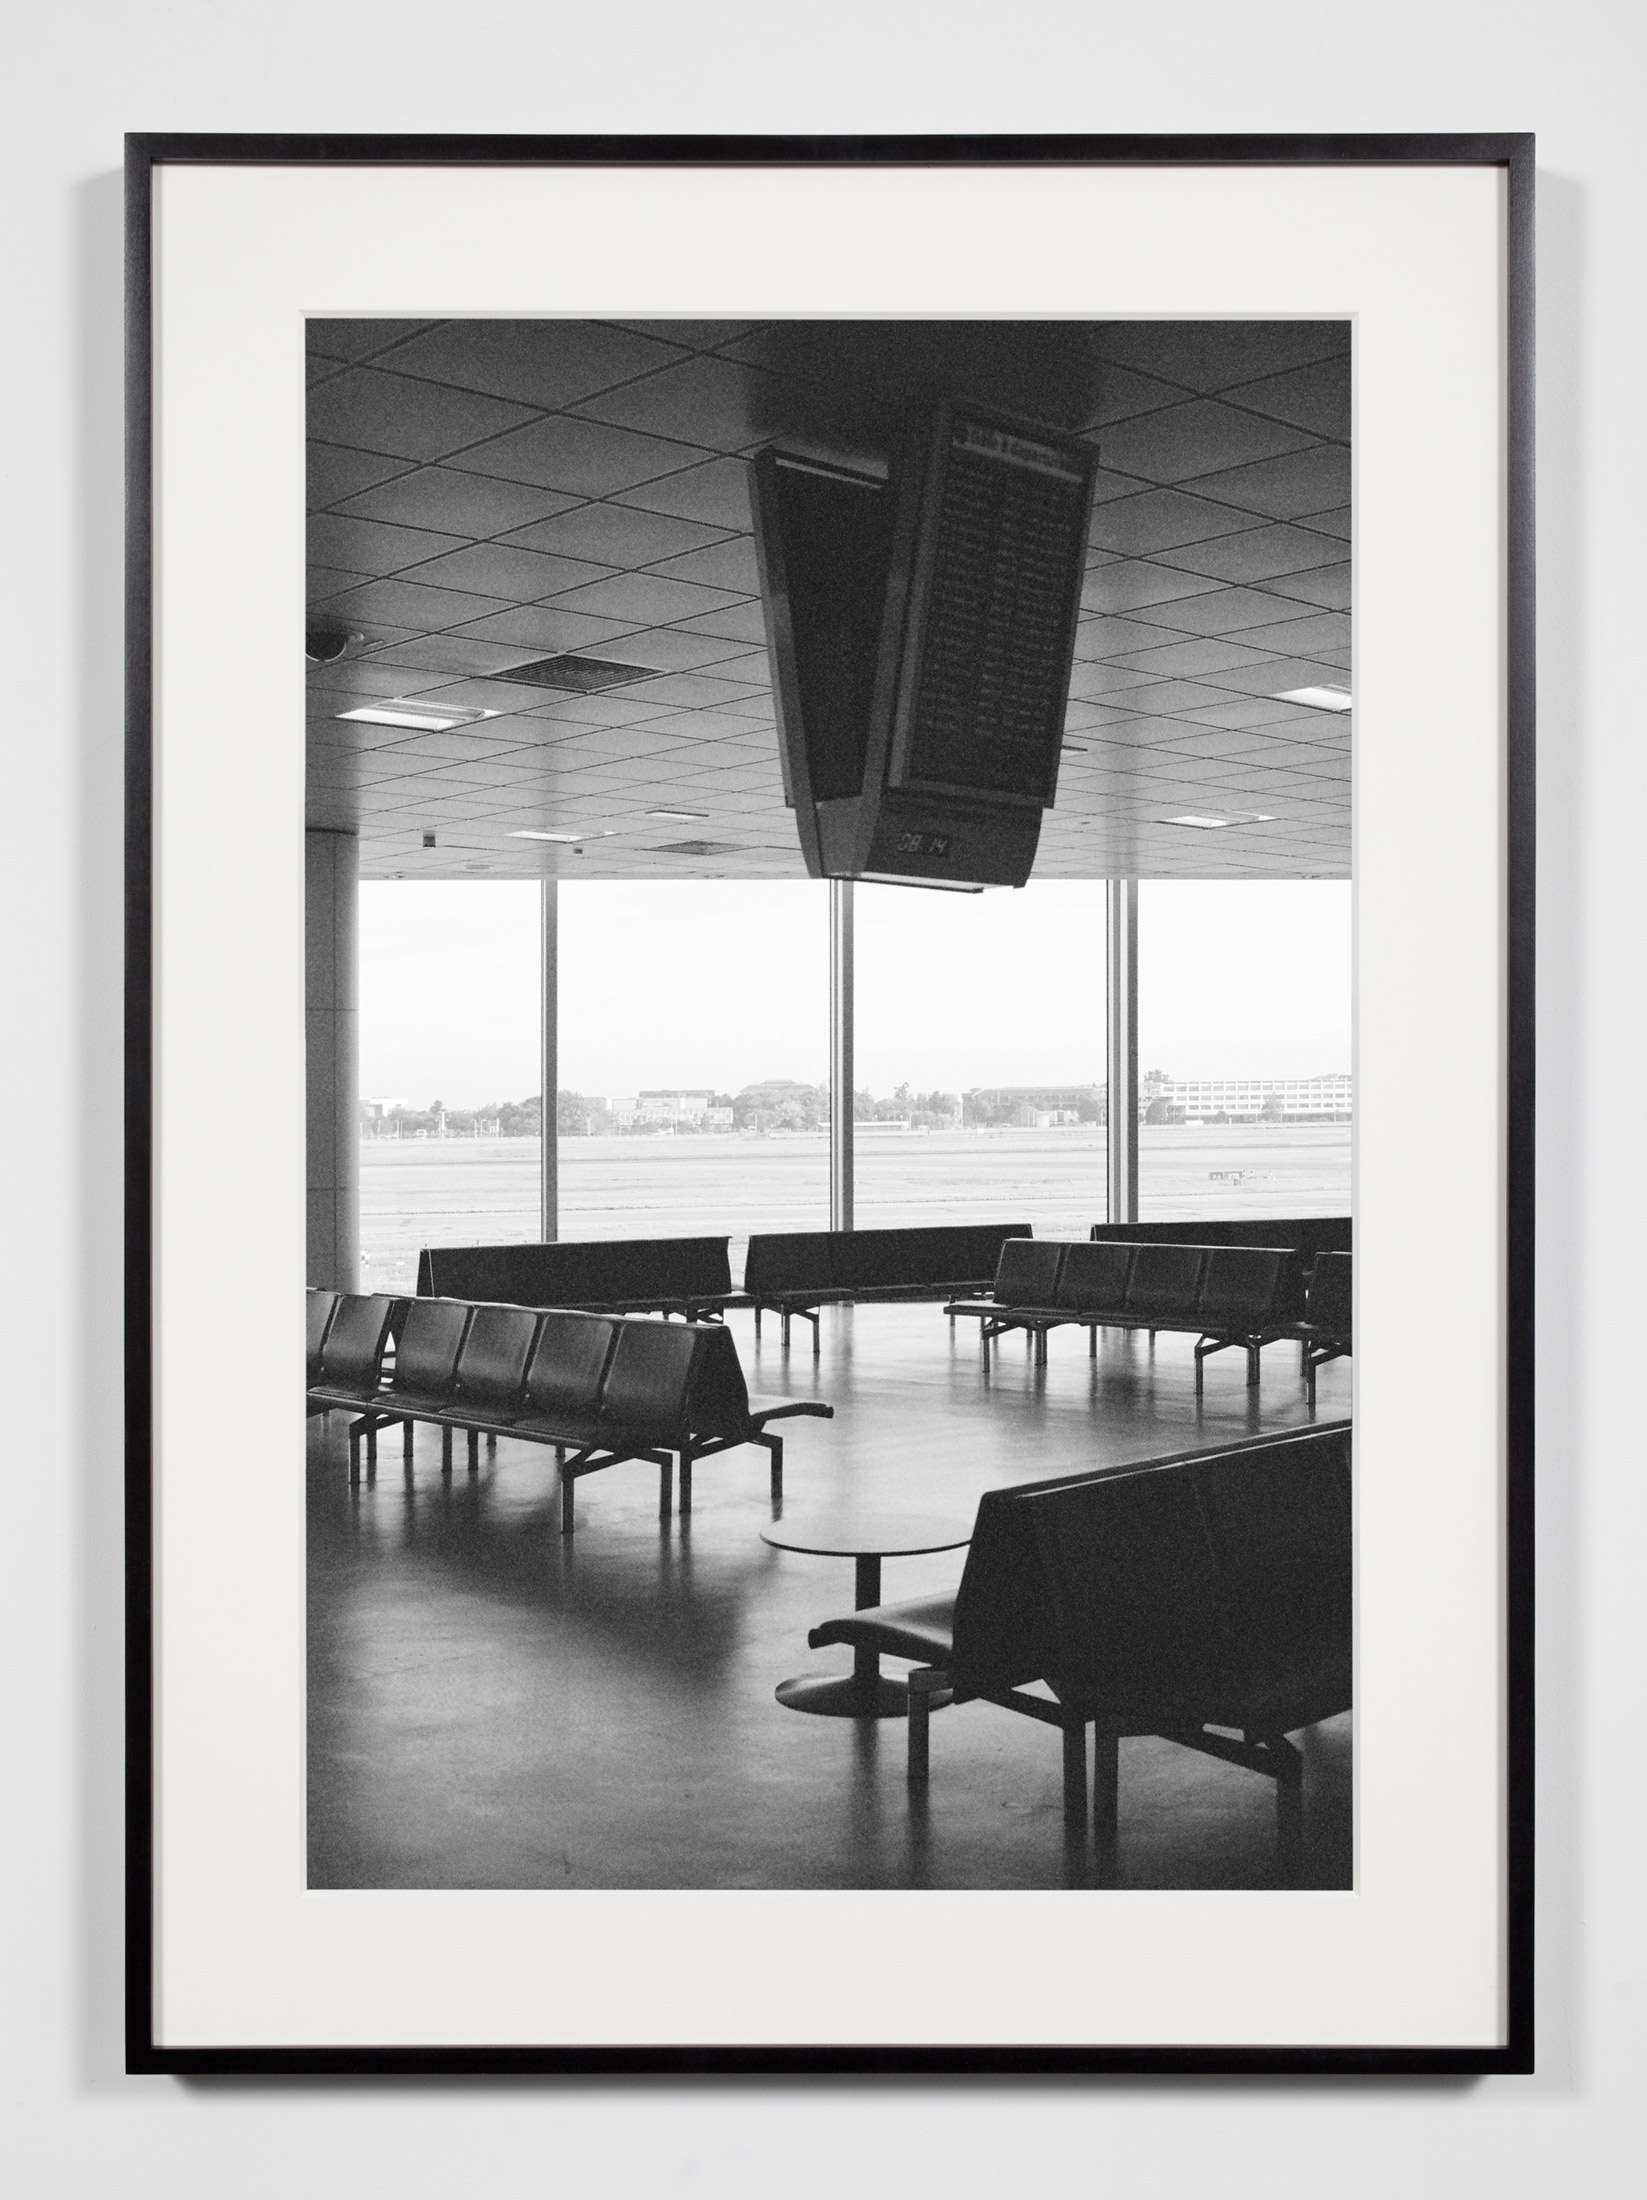   Airport Lounge, Belfast, Ireland, September 10, 2010    2011   Epson Ultrachrome K3 archival ink jet print on Hahnemühle Photo Rag paper  36 3/8 x 26 3/8 inches   Industrial Portraits, 2008–     